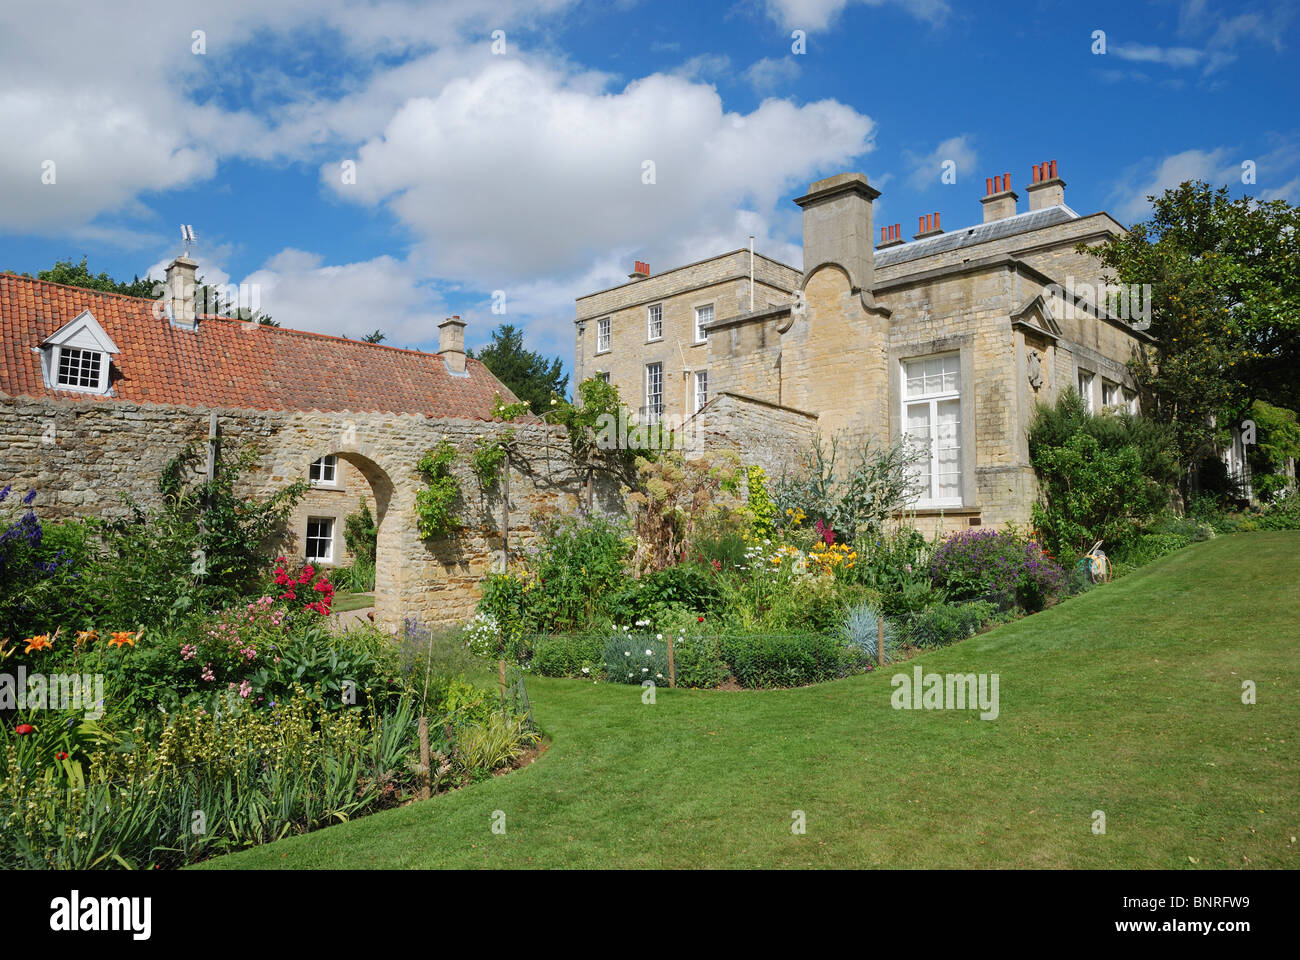 Cottages and grounds to the rear of Fulbeck Hall, Lincolnshire, England. Stock Photo